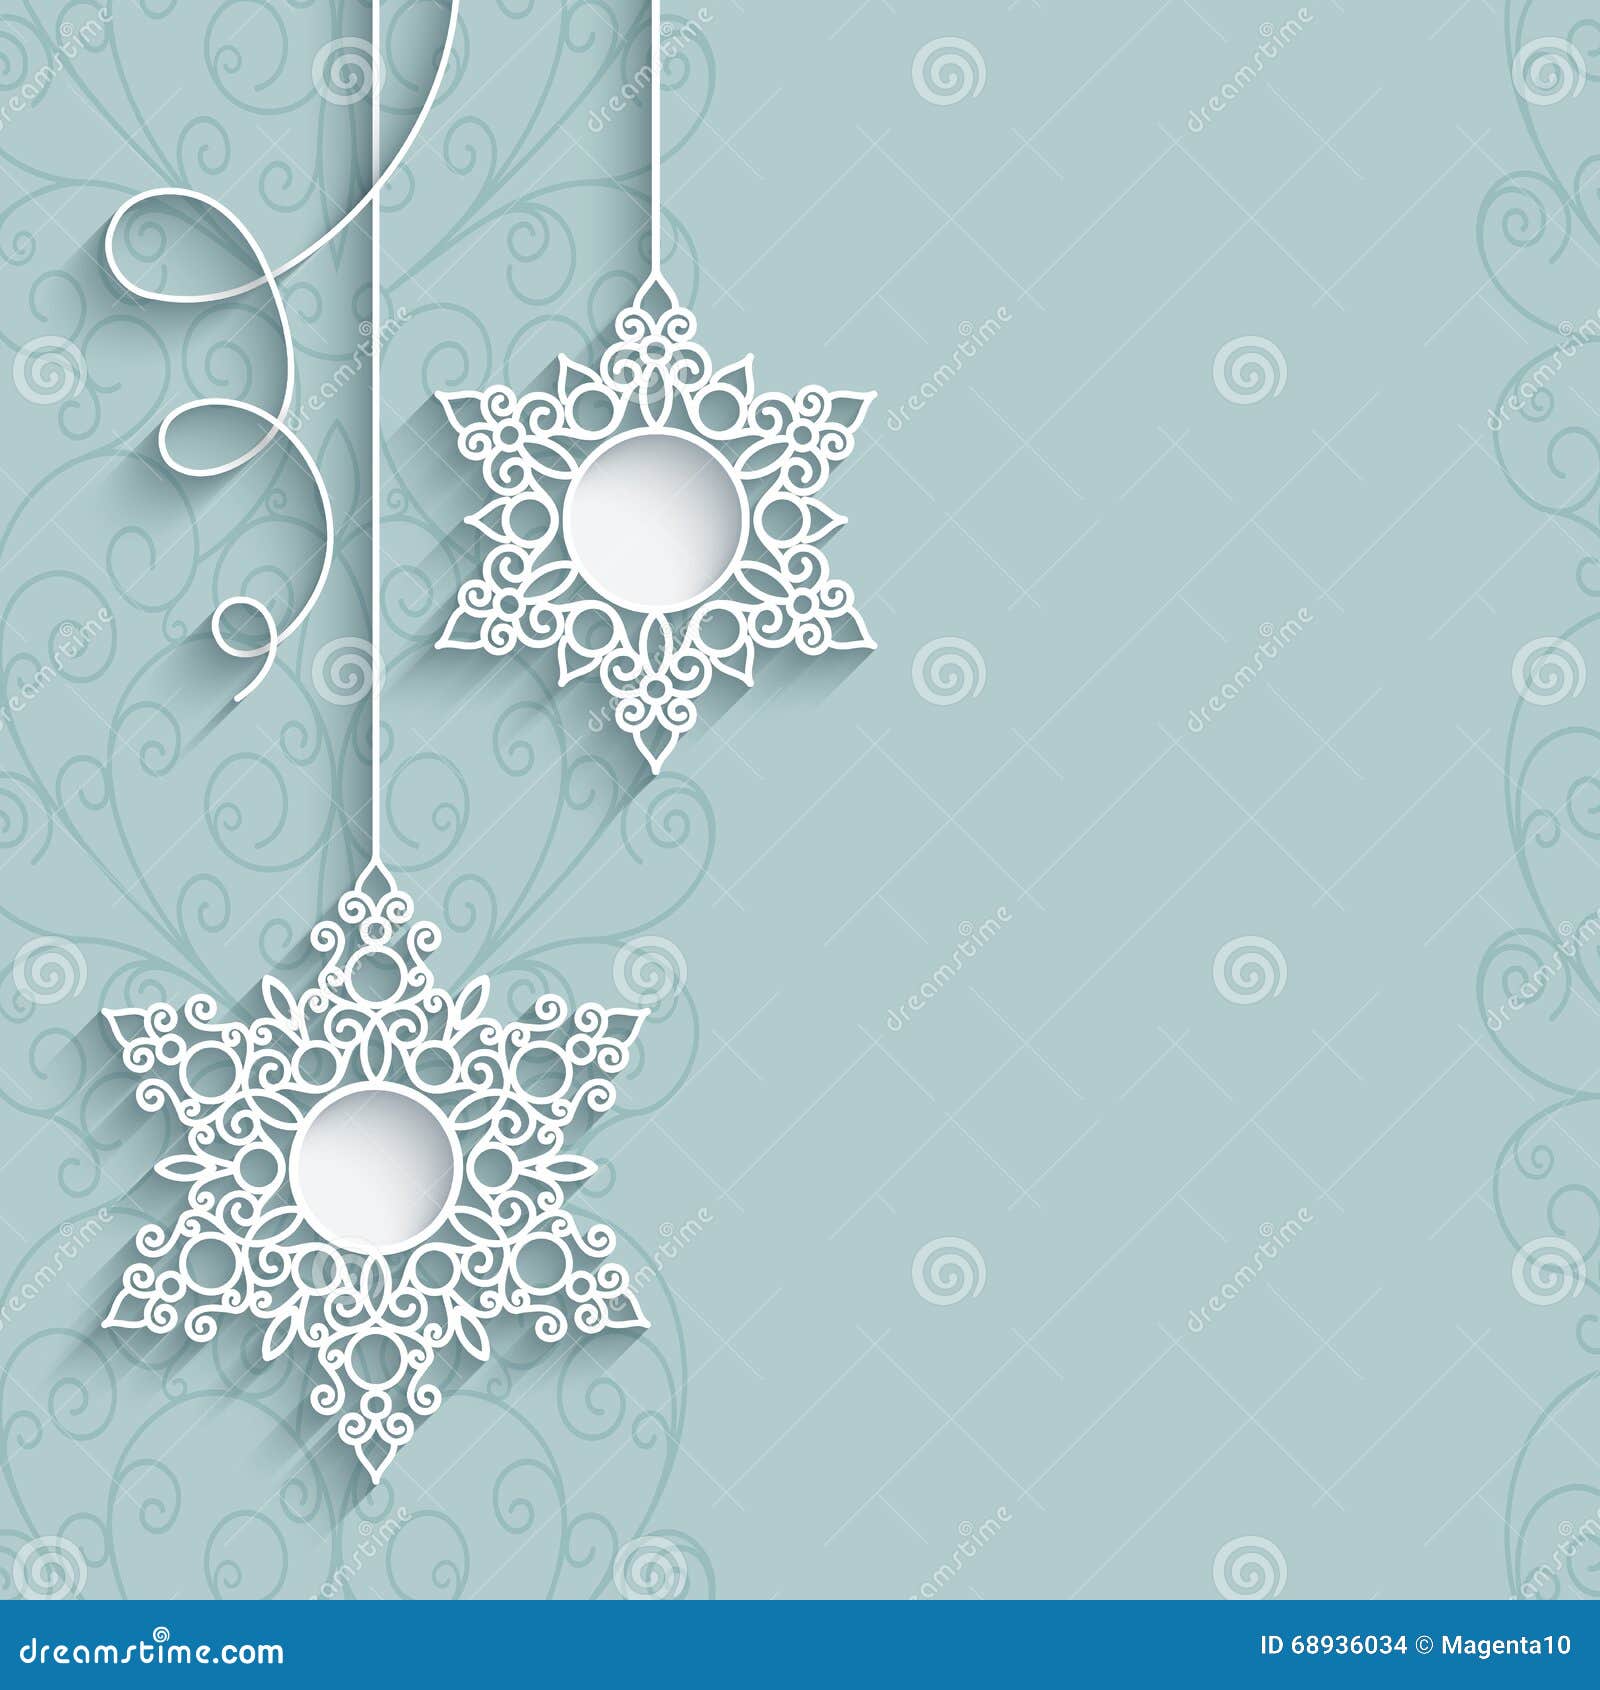 Lace Snowflake Pendants On Neutral Background Stock Vector ...